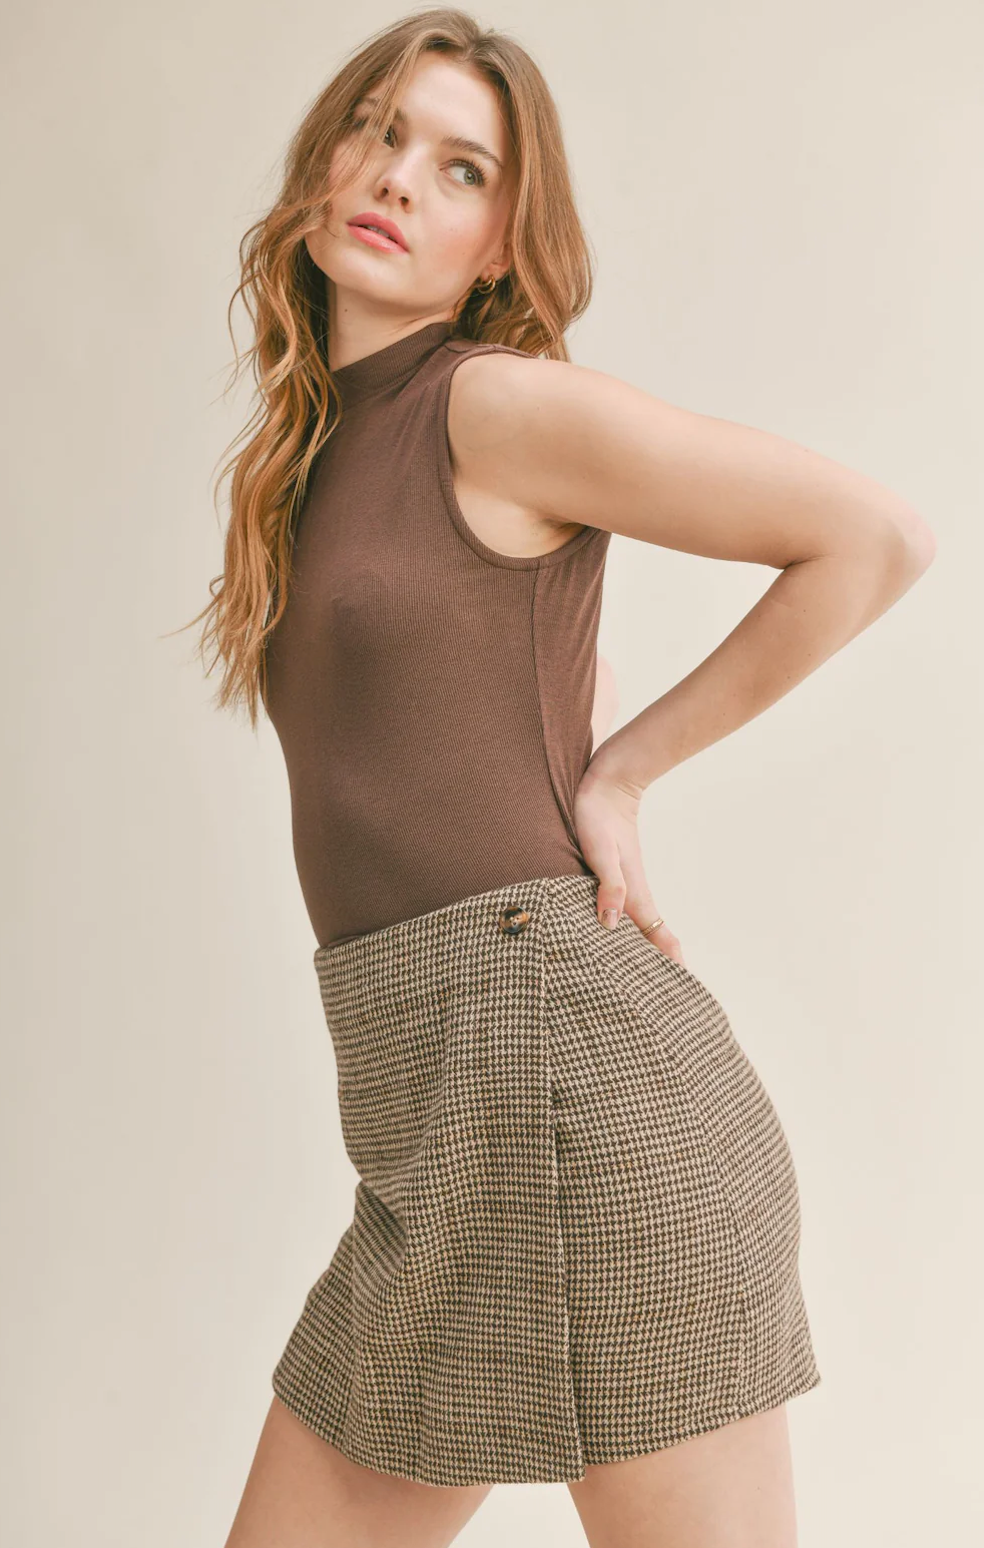 S'MORES SLEEVELESS TOP IN CHOCOLATE